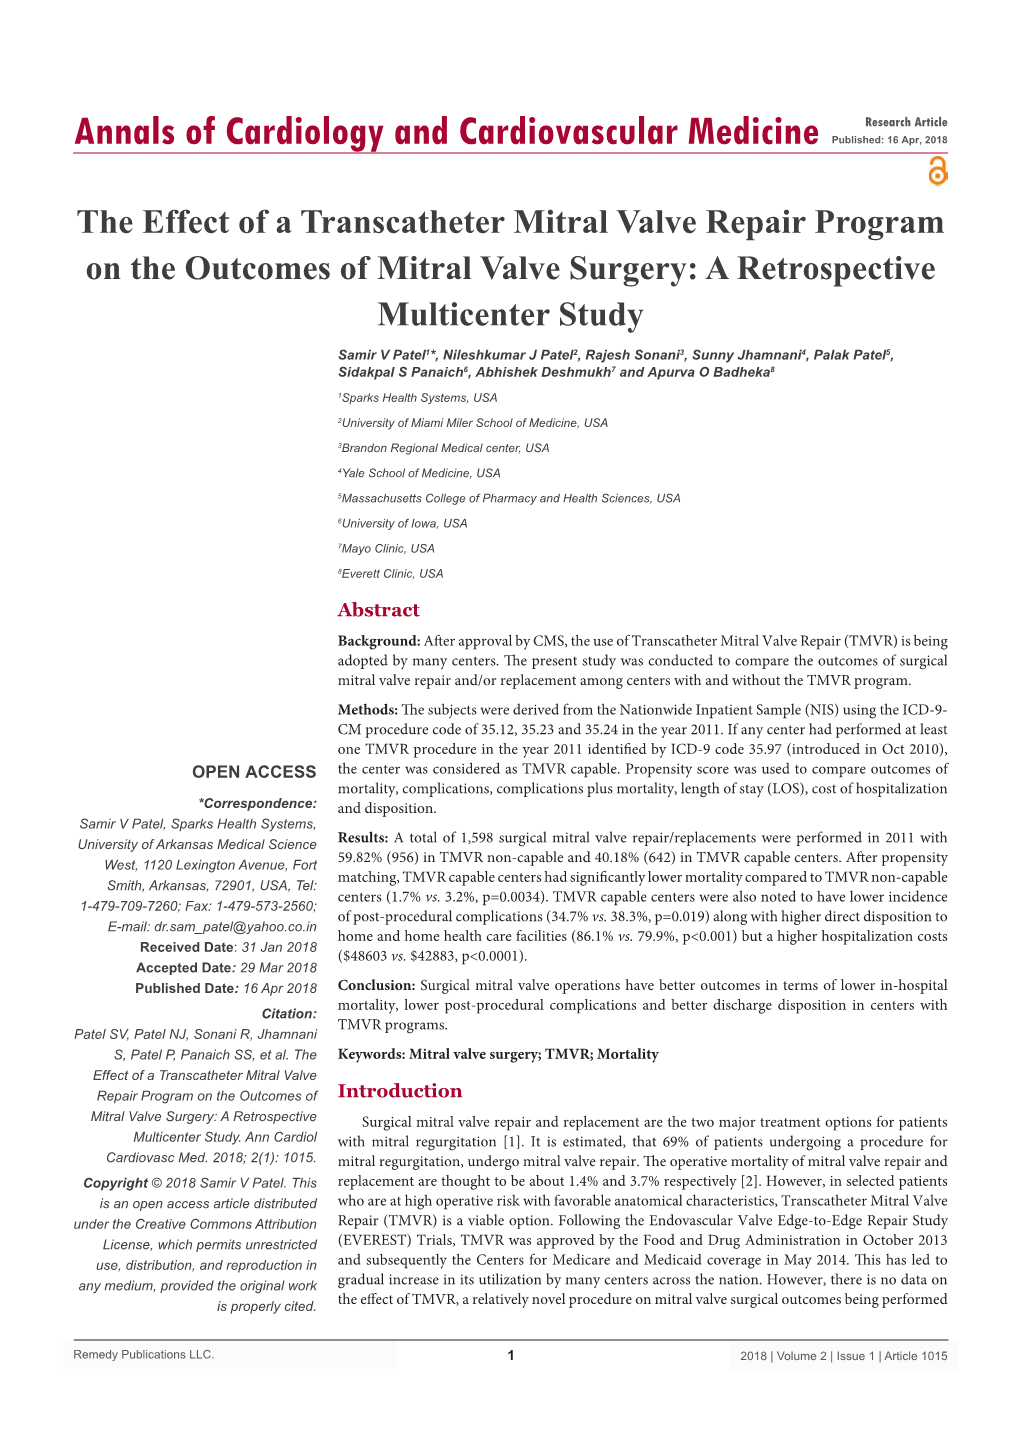 The Effect of a Transcatheter Mitral Valve Repair Program on the Outcomes of Mitral Valve Surgery: a Retrospective Multicenter Study